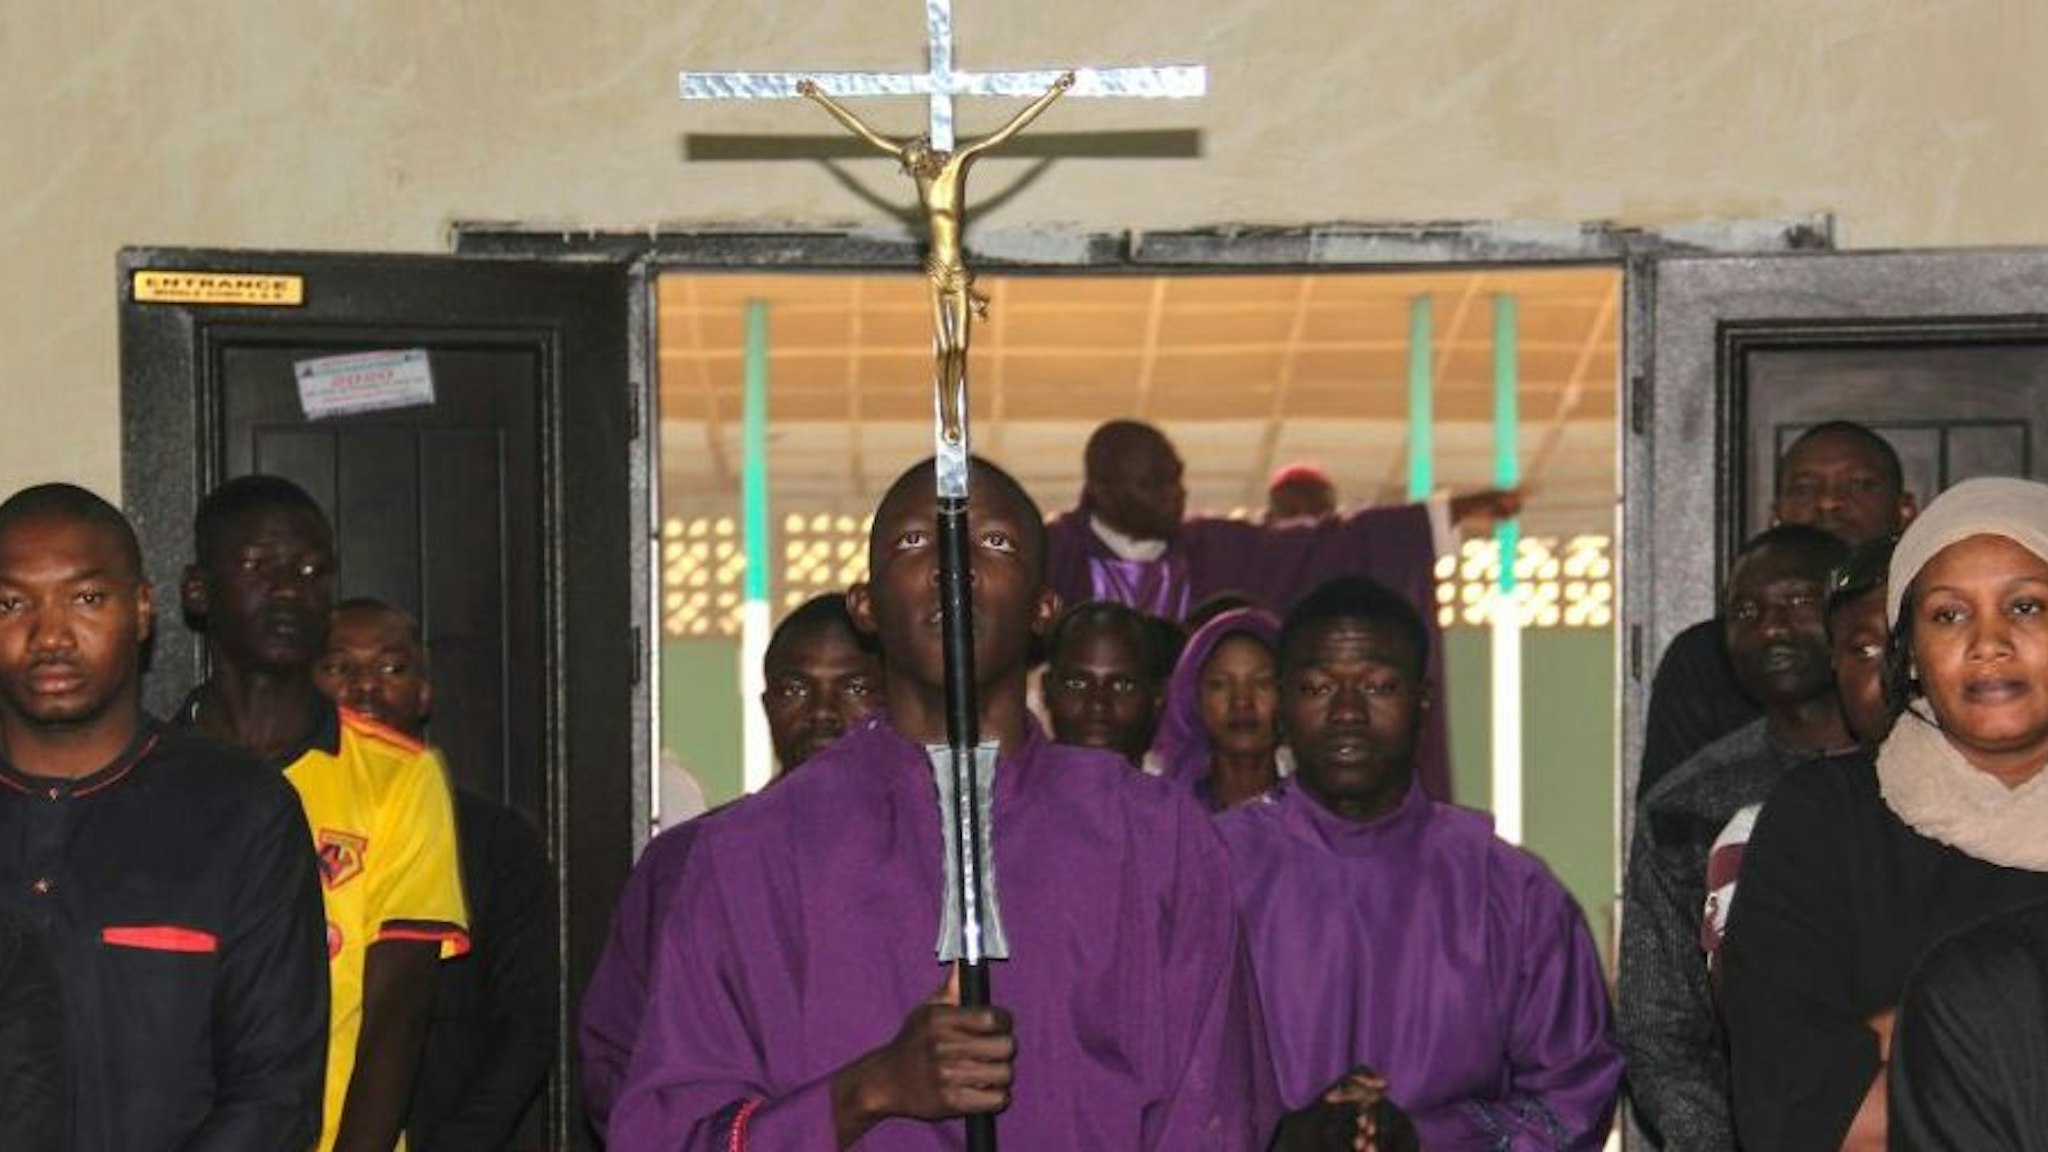 Catholics take part in the Ash Wednesday celebration at the St. Patrick cathedral in Maiduguri on February 26, 2020.